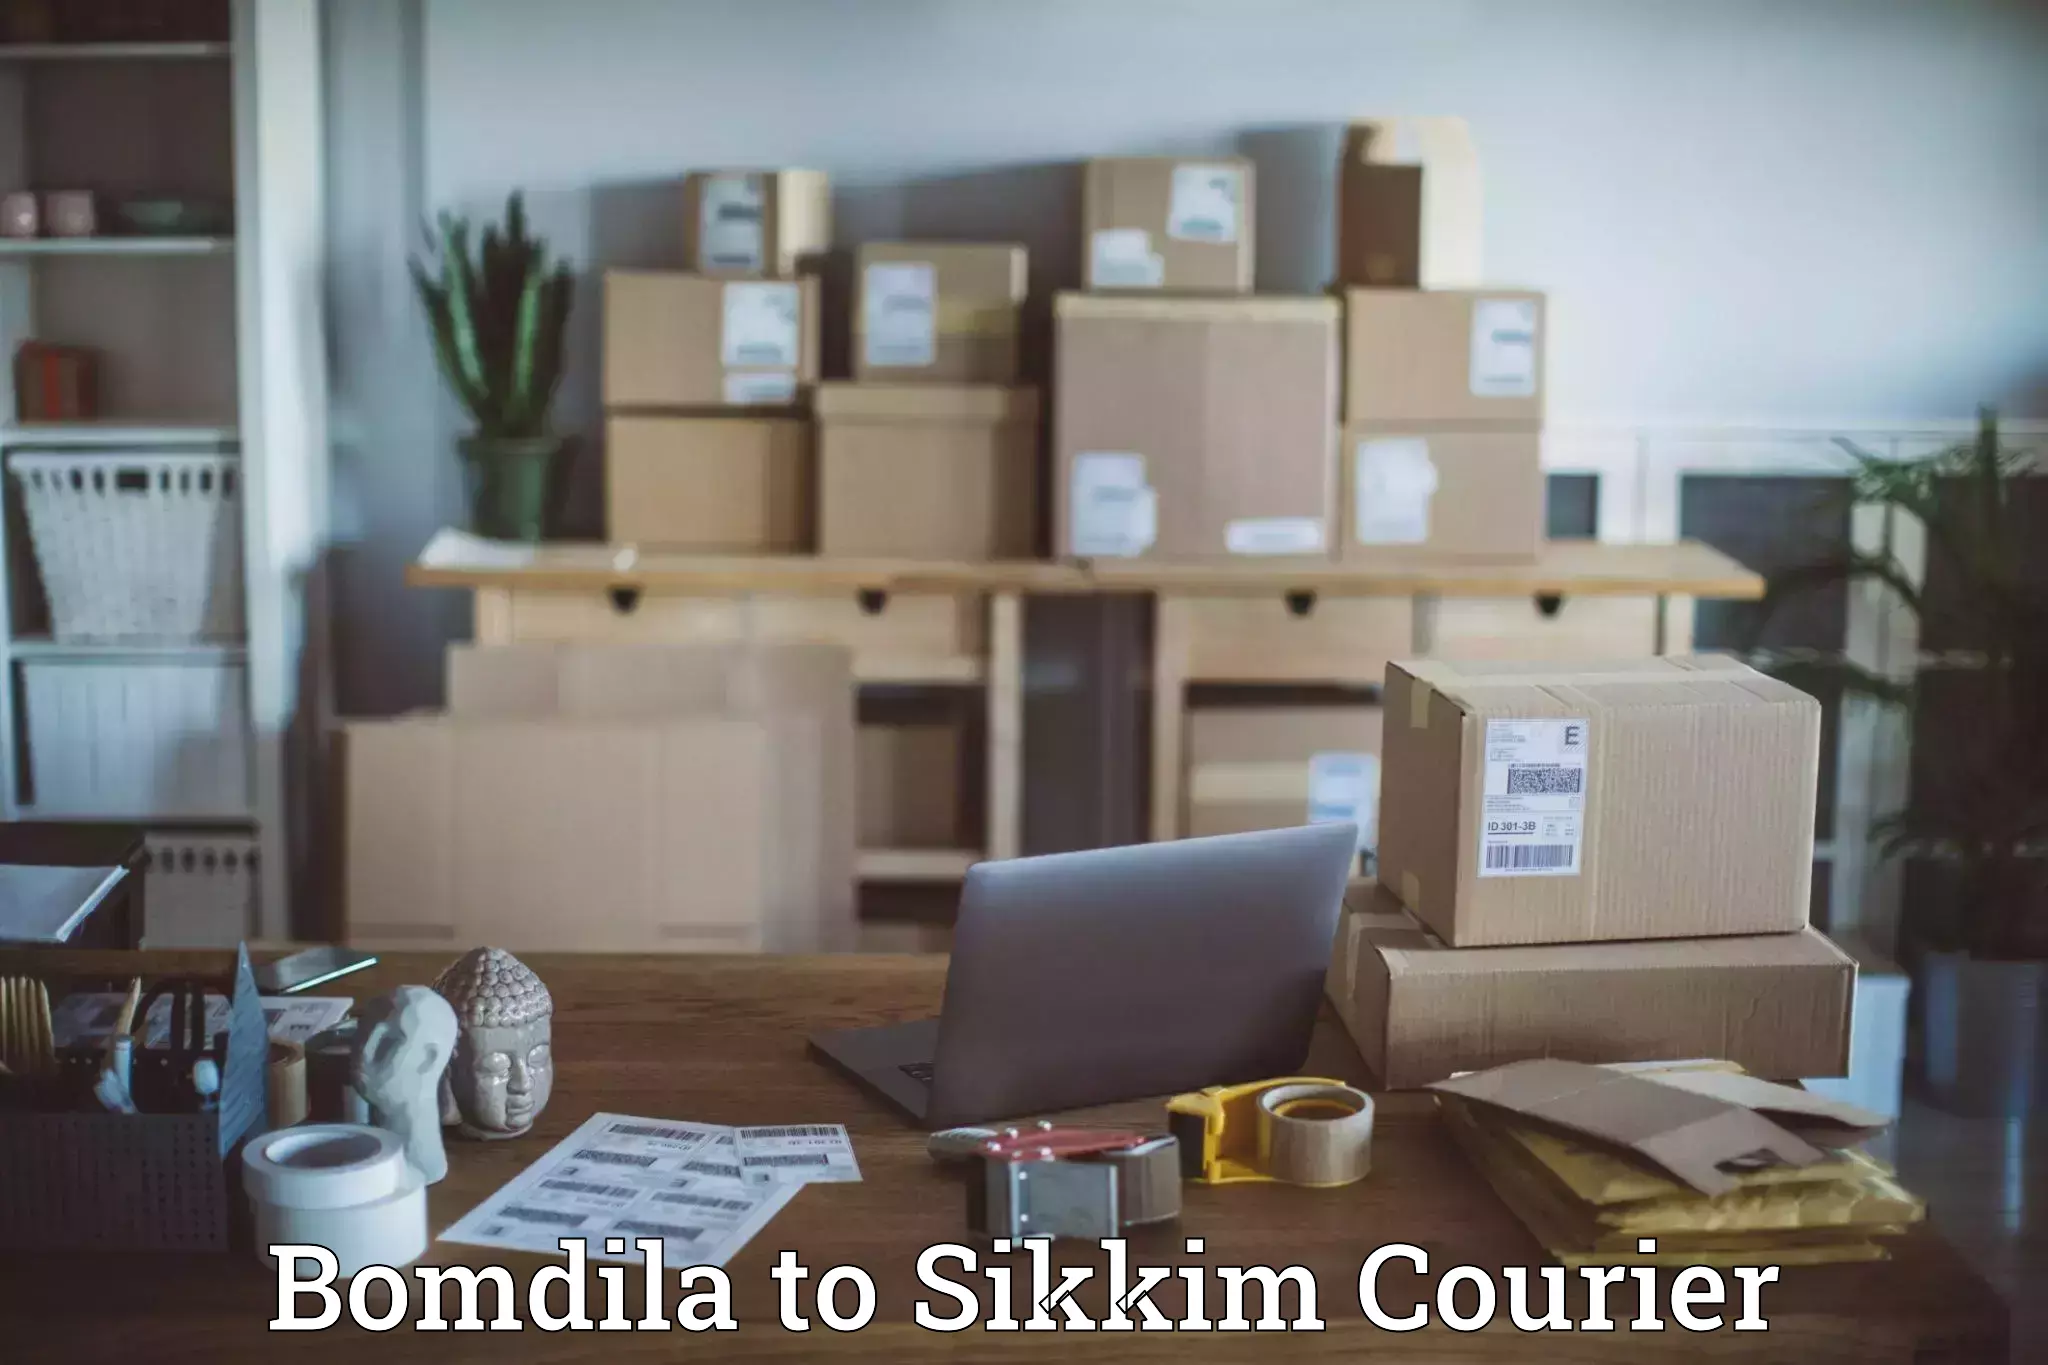 State-of-the-art courier technology Bomdila to East Sikkim